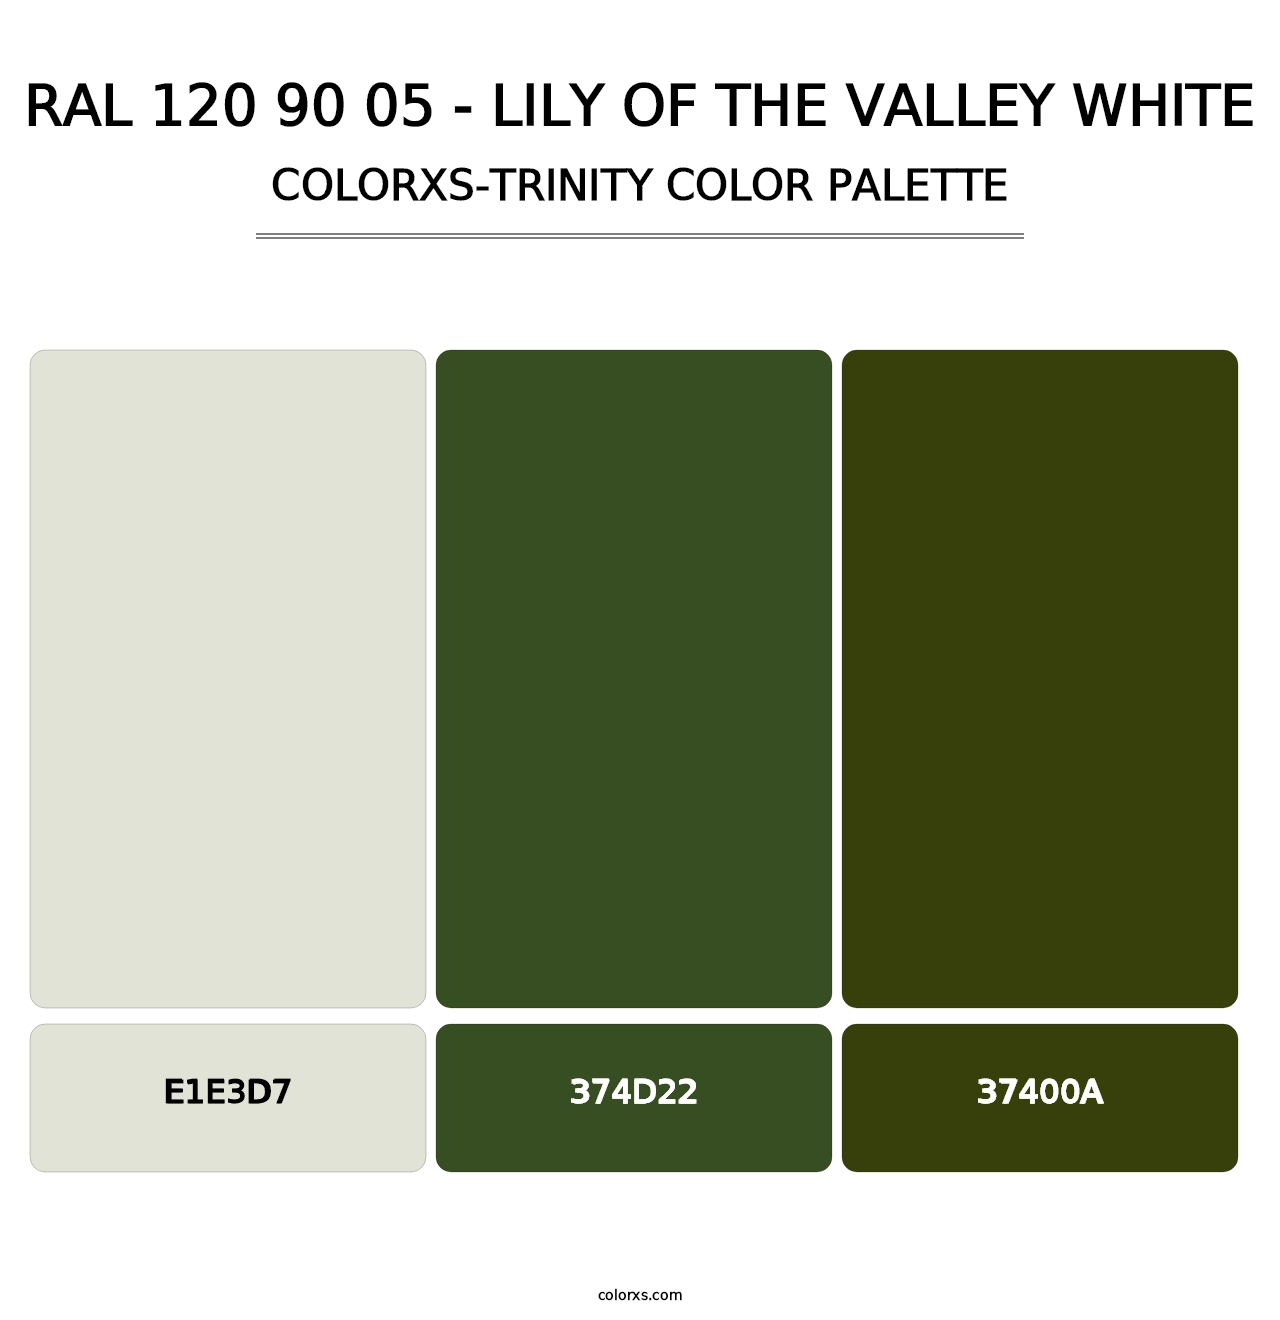 RAL 120 90 05 - Lily of the Valley White - Colorxs Trinity Palette